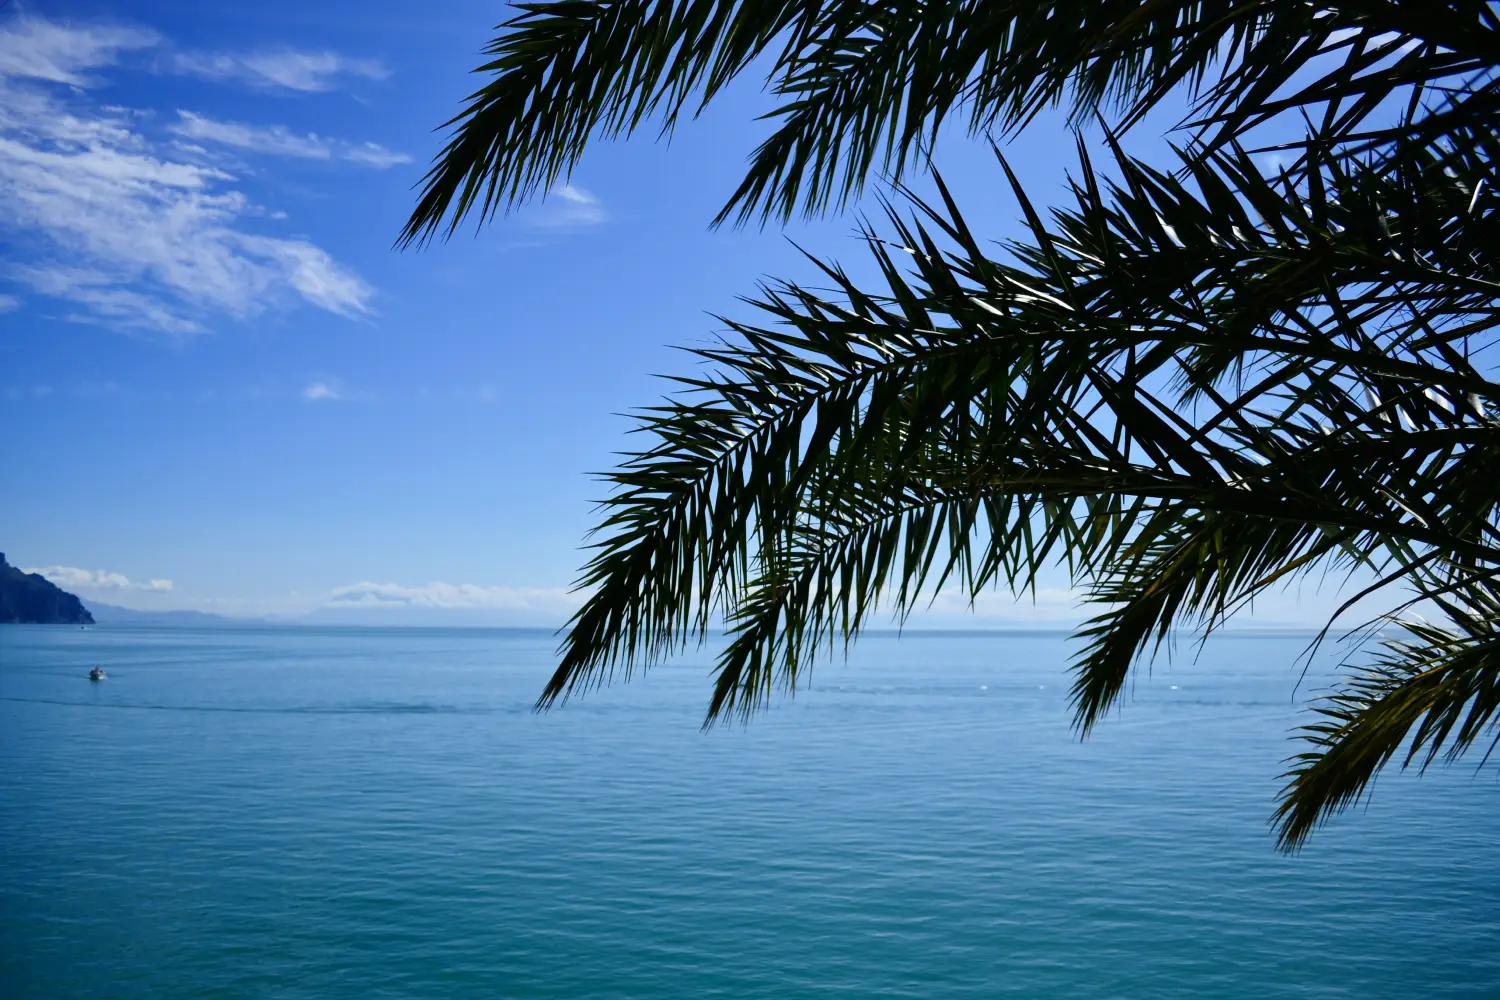 Ferry to Molo Manfredi (Sorrento) - Palm tree with sea view behind.